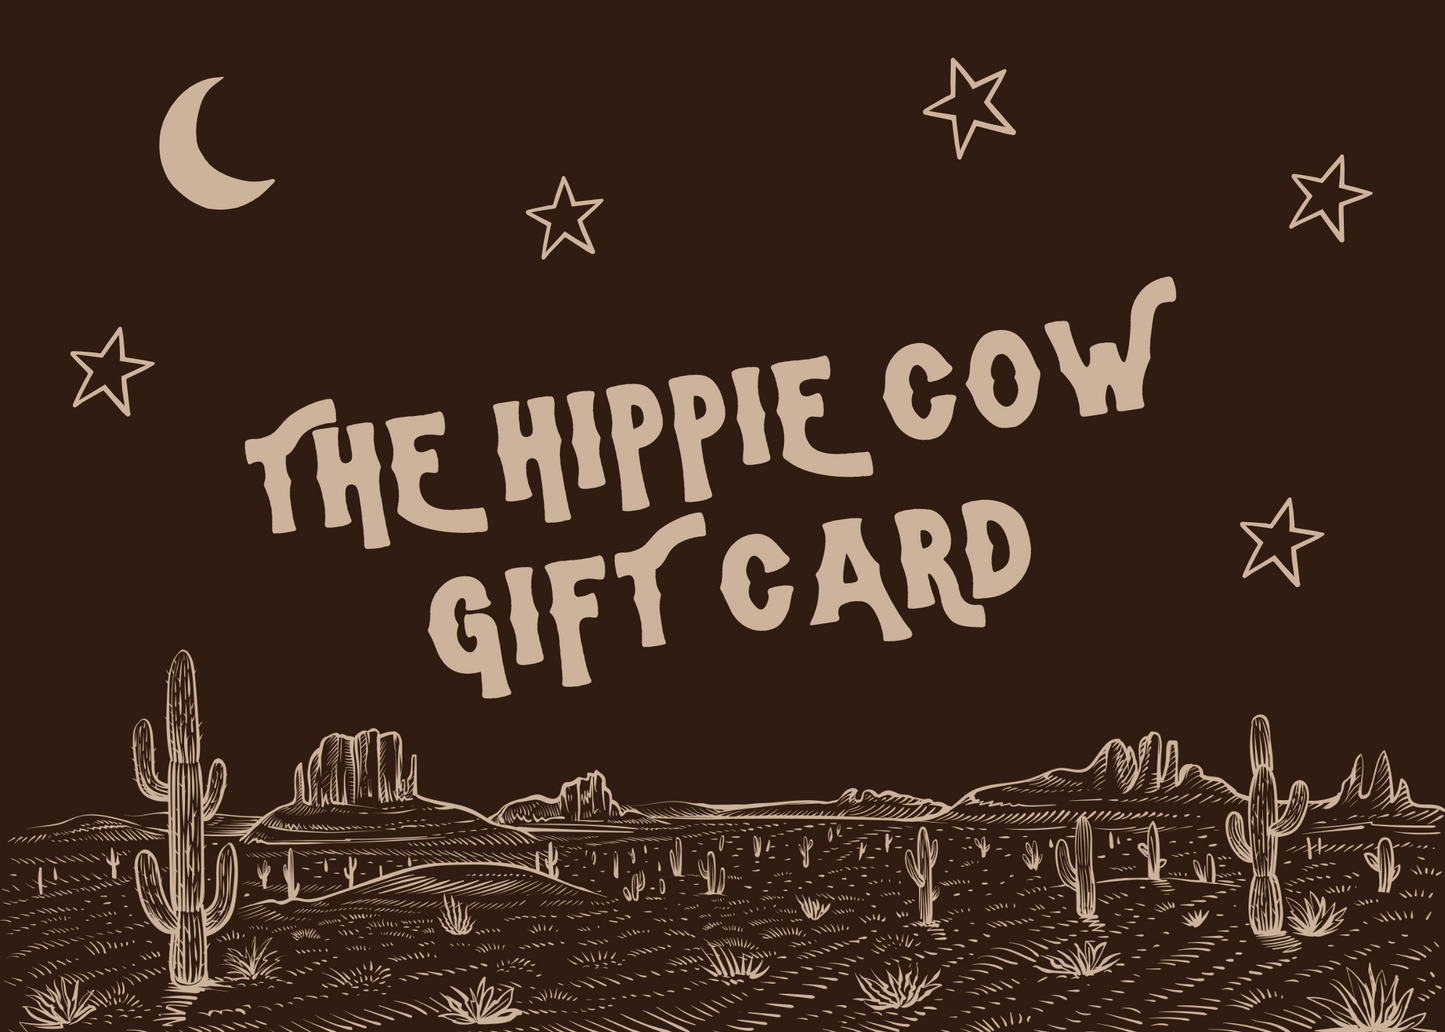 The Hippie Cow Gift Card